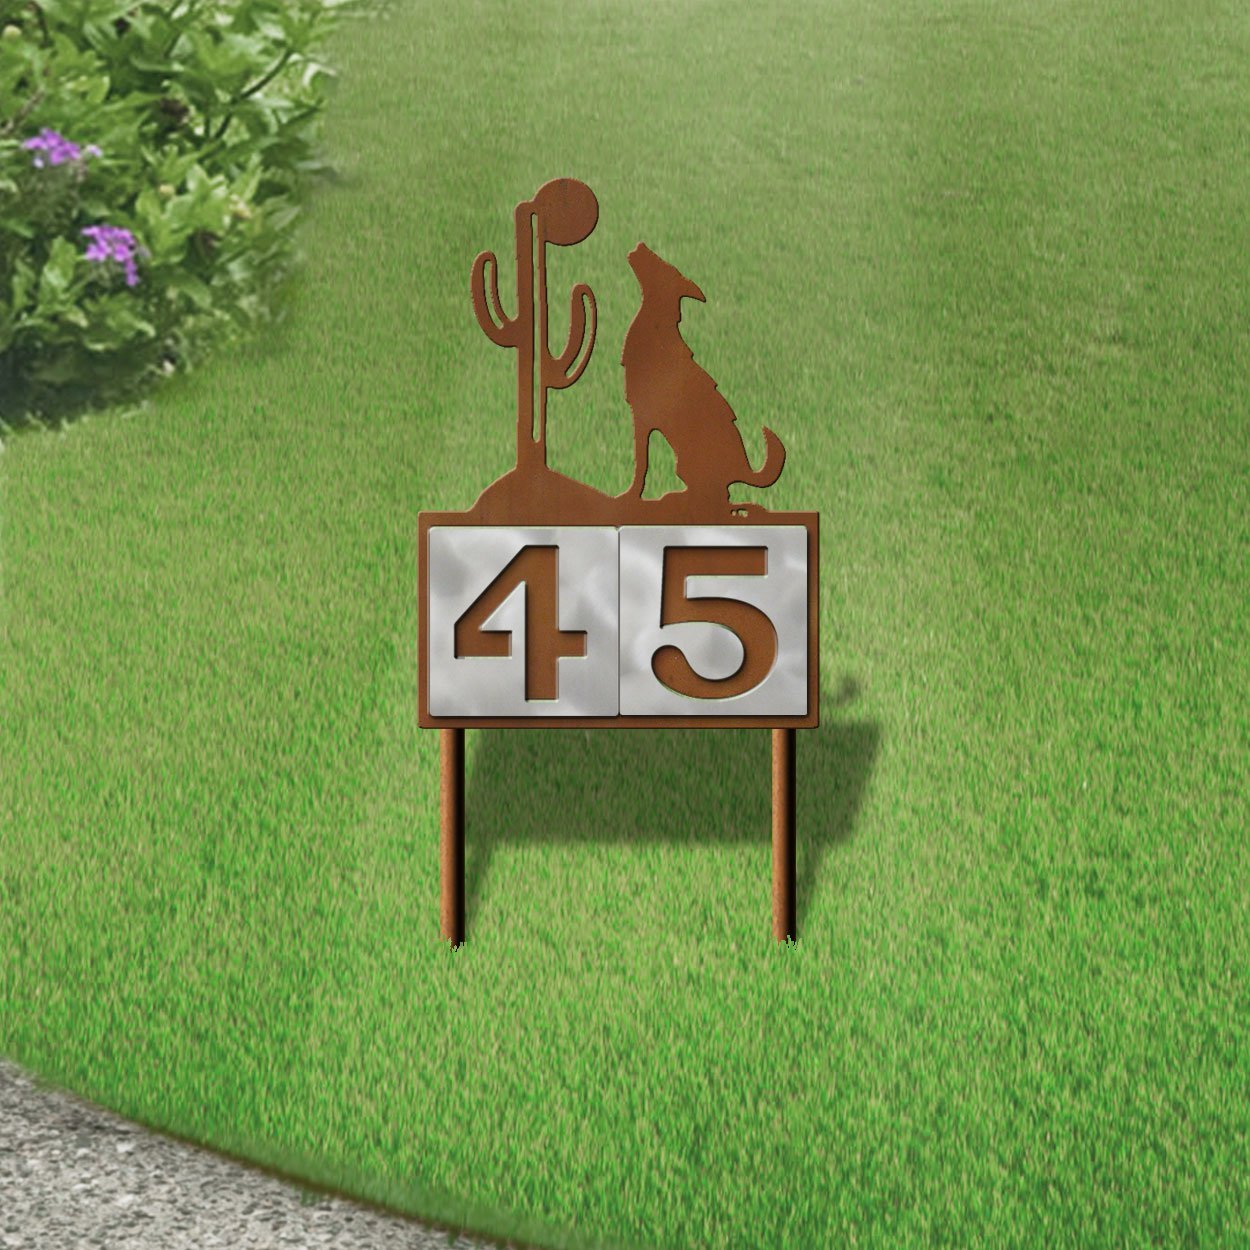 610082 - Howling Coyote Design 2-Digit Horizontal 6-inch Tile Outdoor House Numbers Yard Sign